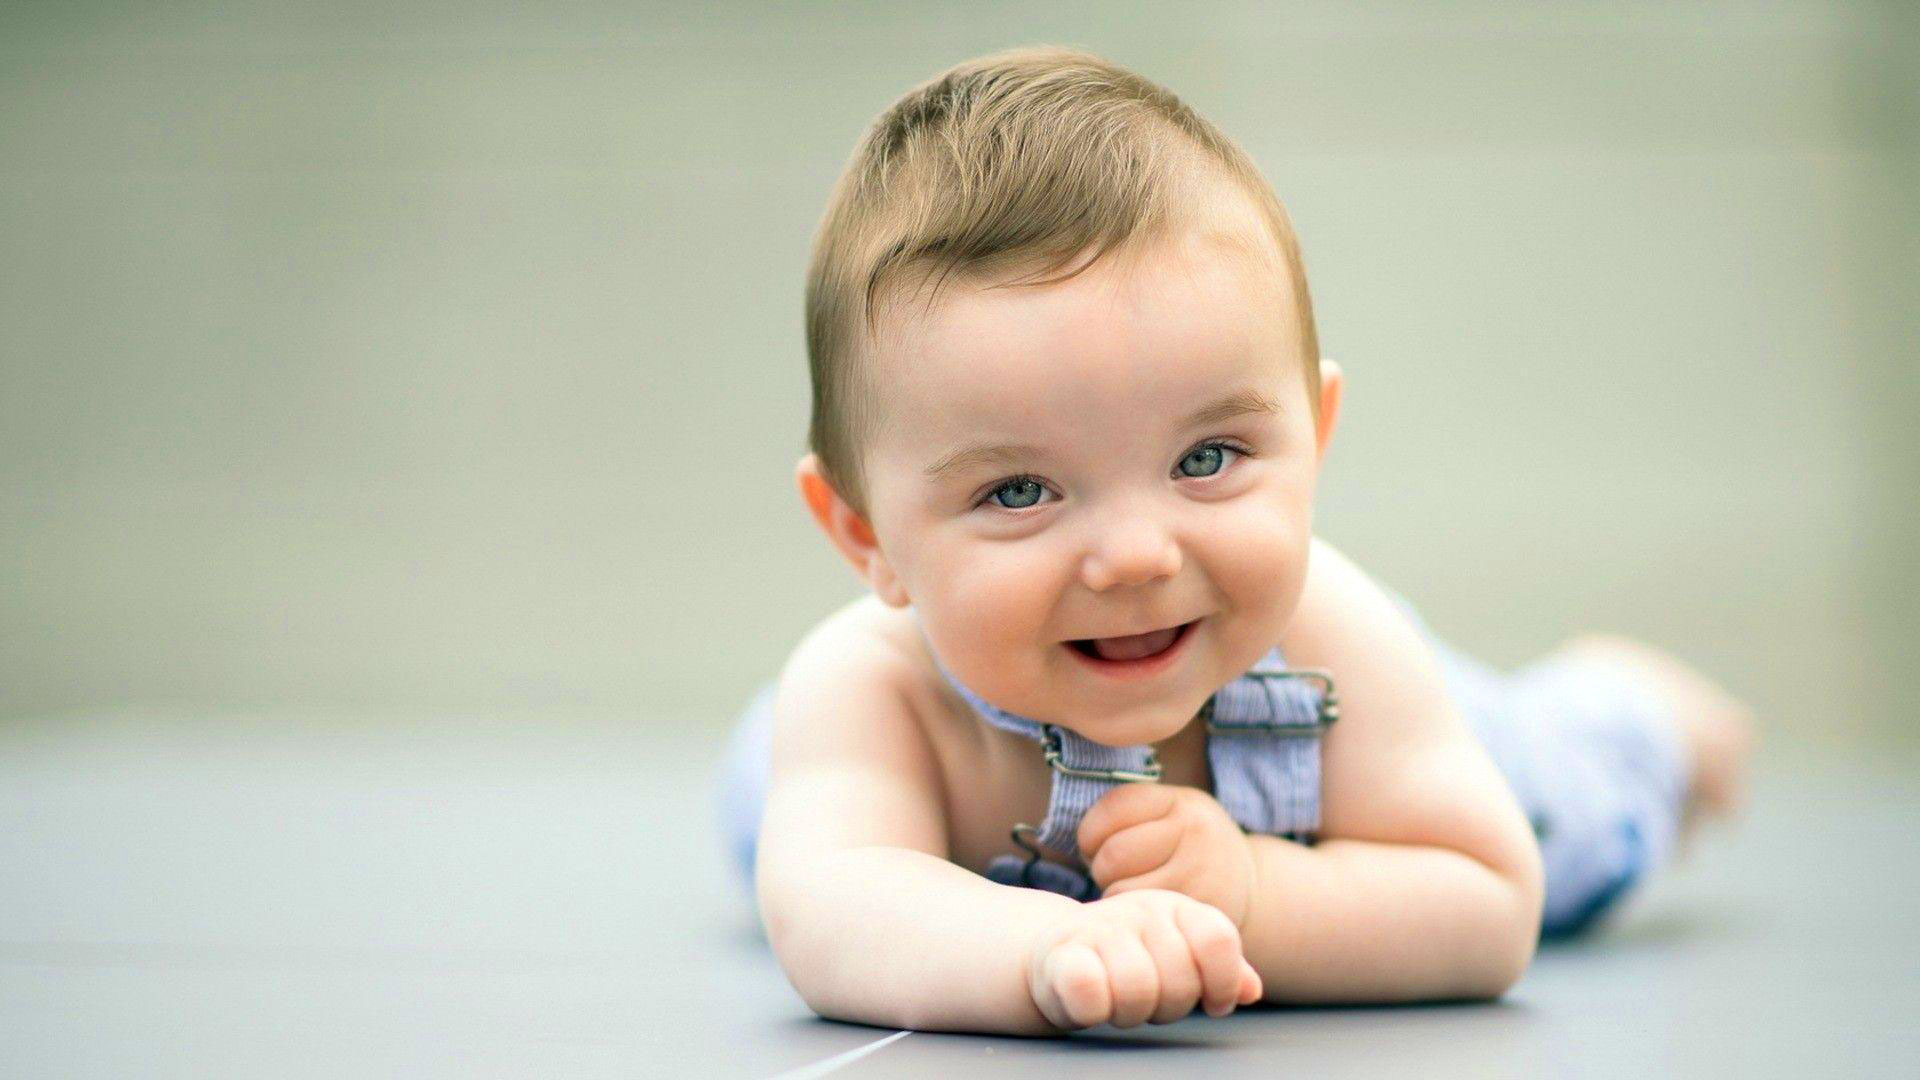 baby pic for dp Images Photo Wallpaper Download